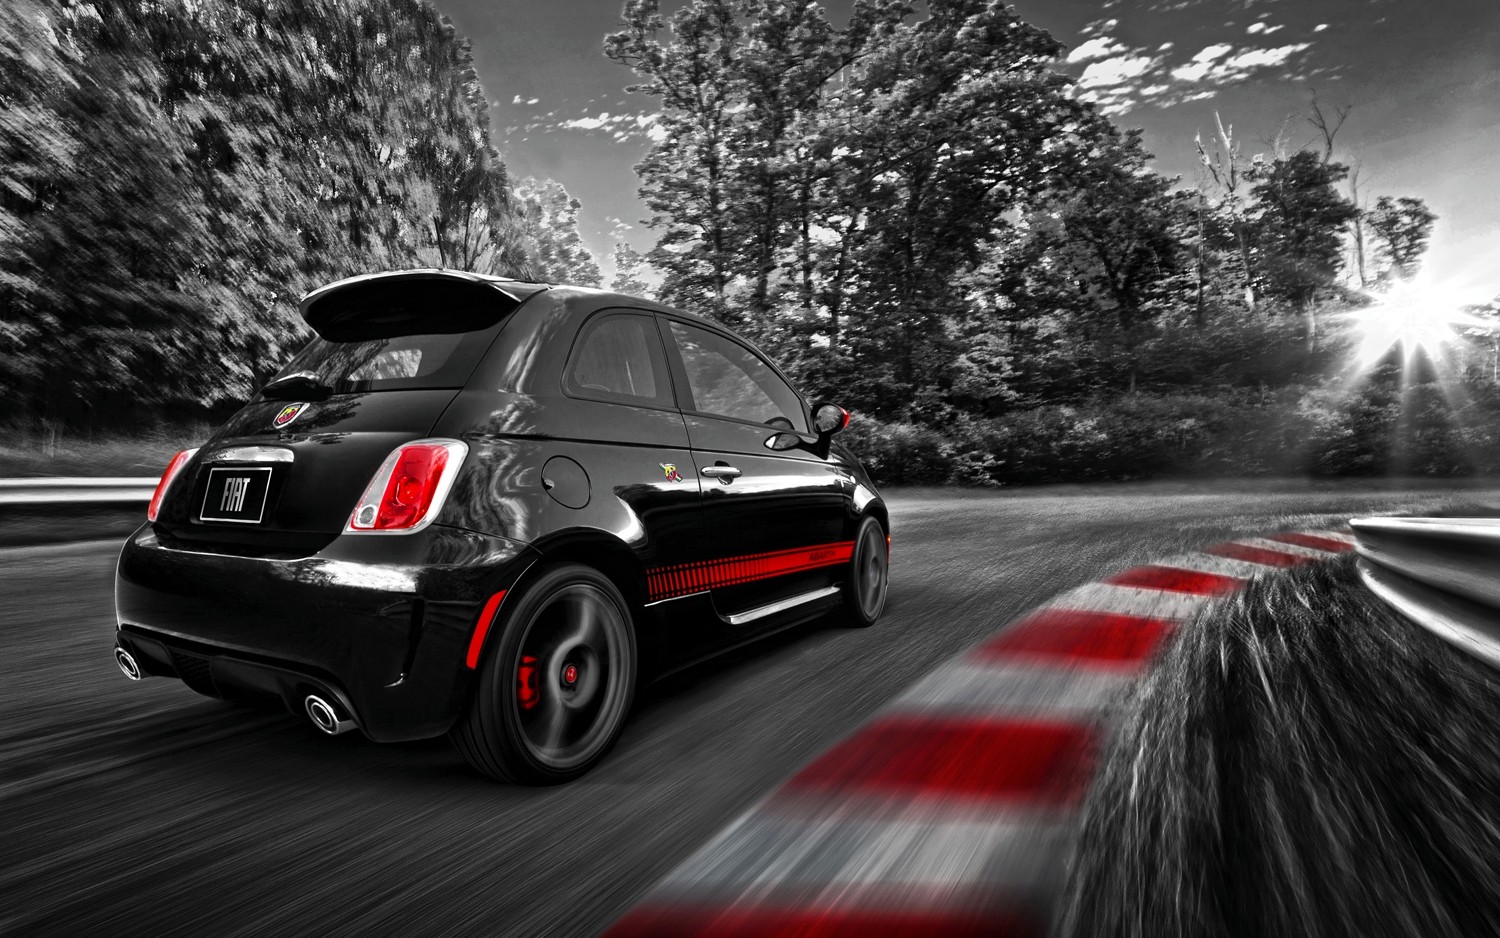 Fiat 2015 Abarth differs significantly #8